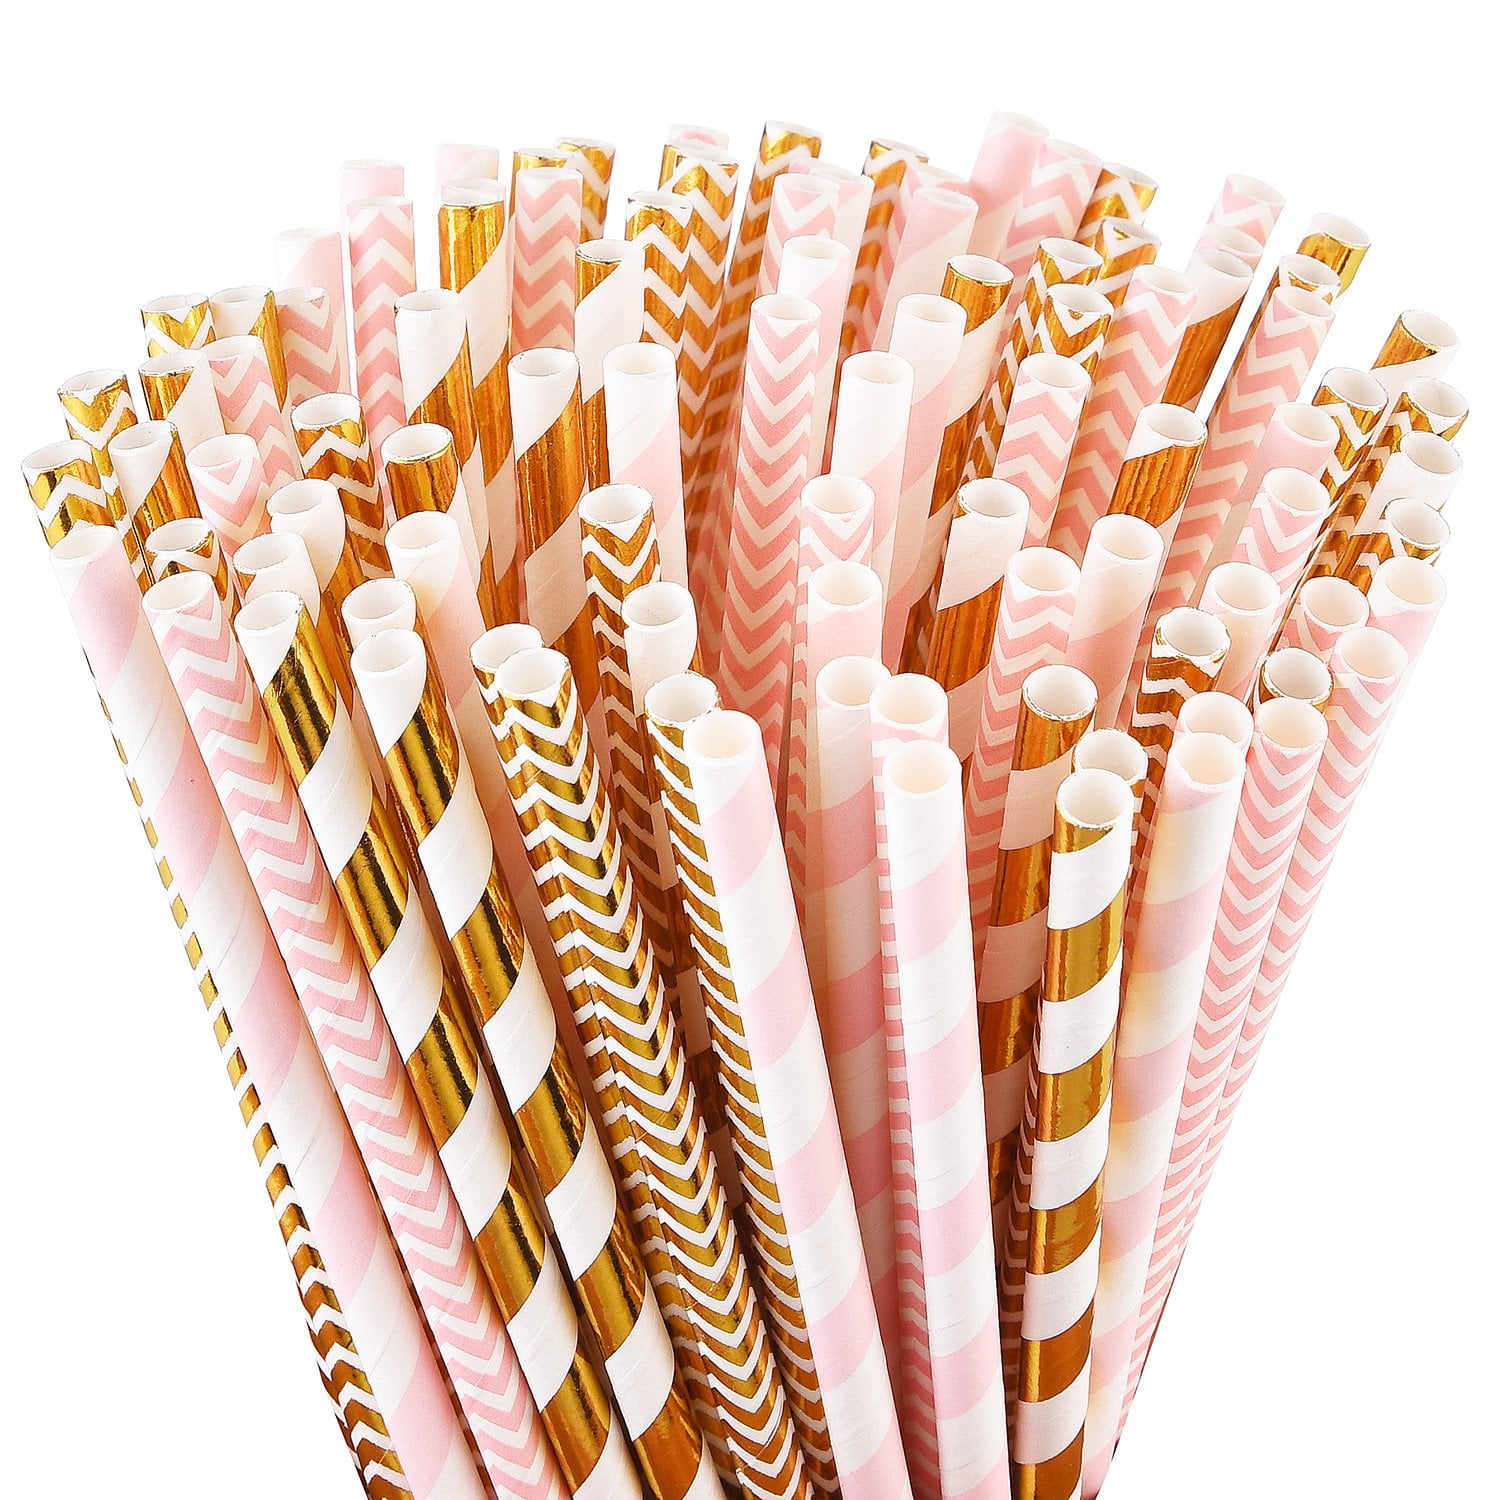 Wholesale Pink GLASS STRAWS Wholesale Straws Reusable Straws Wedding Favors Pink  Straws Wholesale Glass Straws Party Favors 